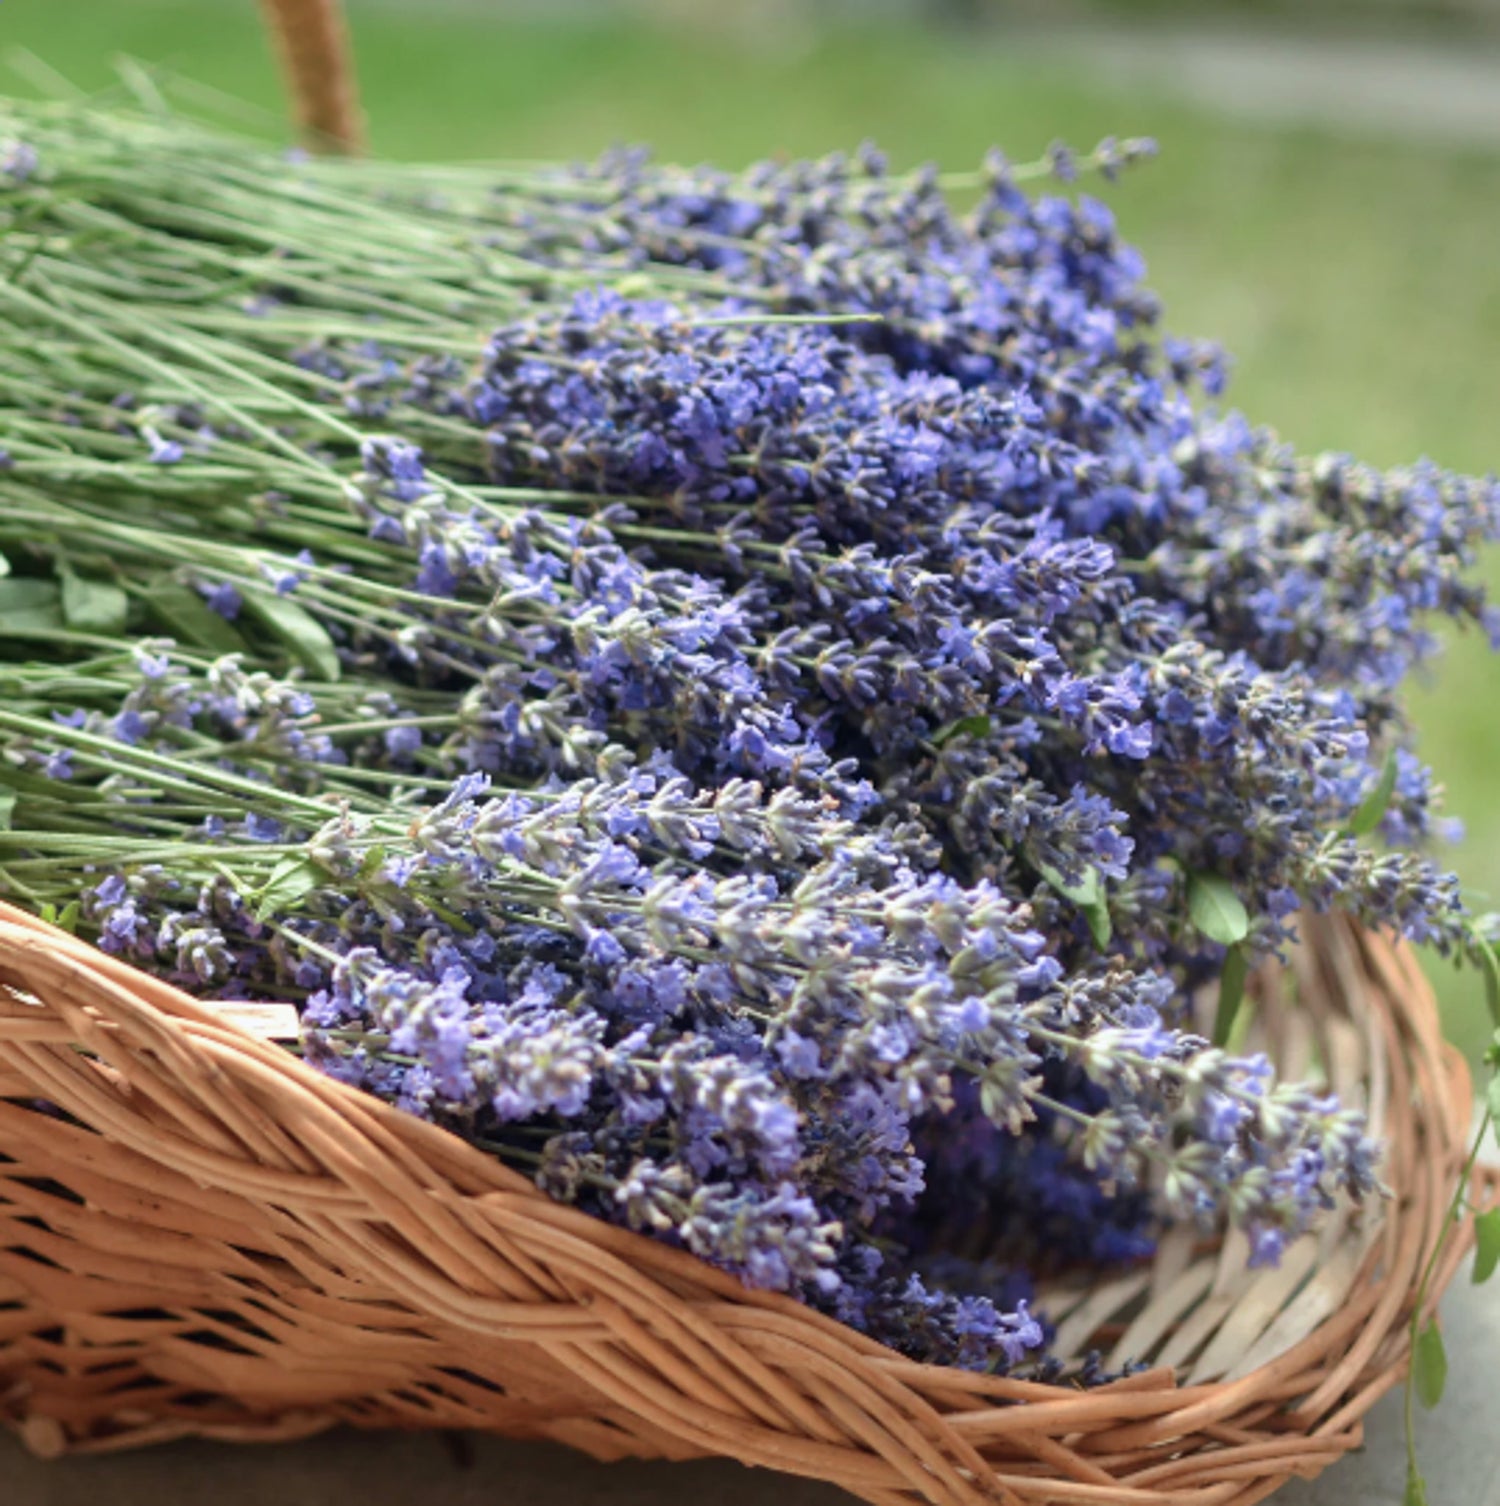 Willow basket with lavender stems